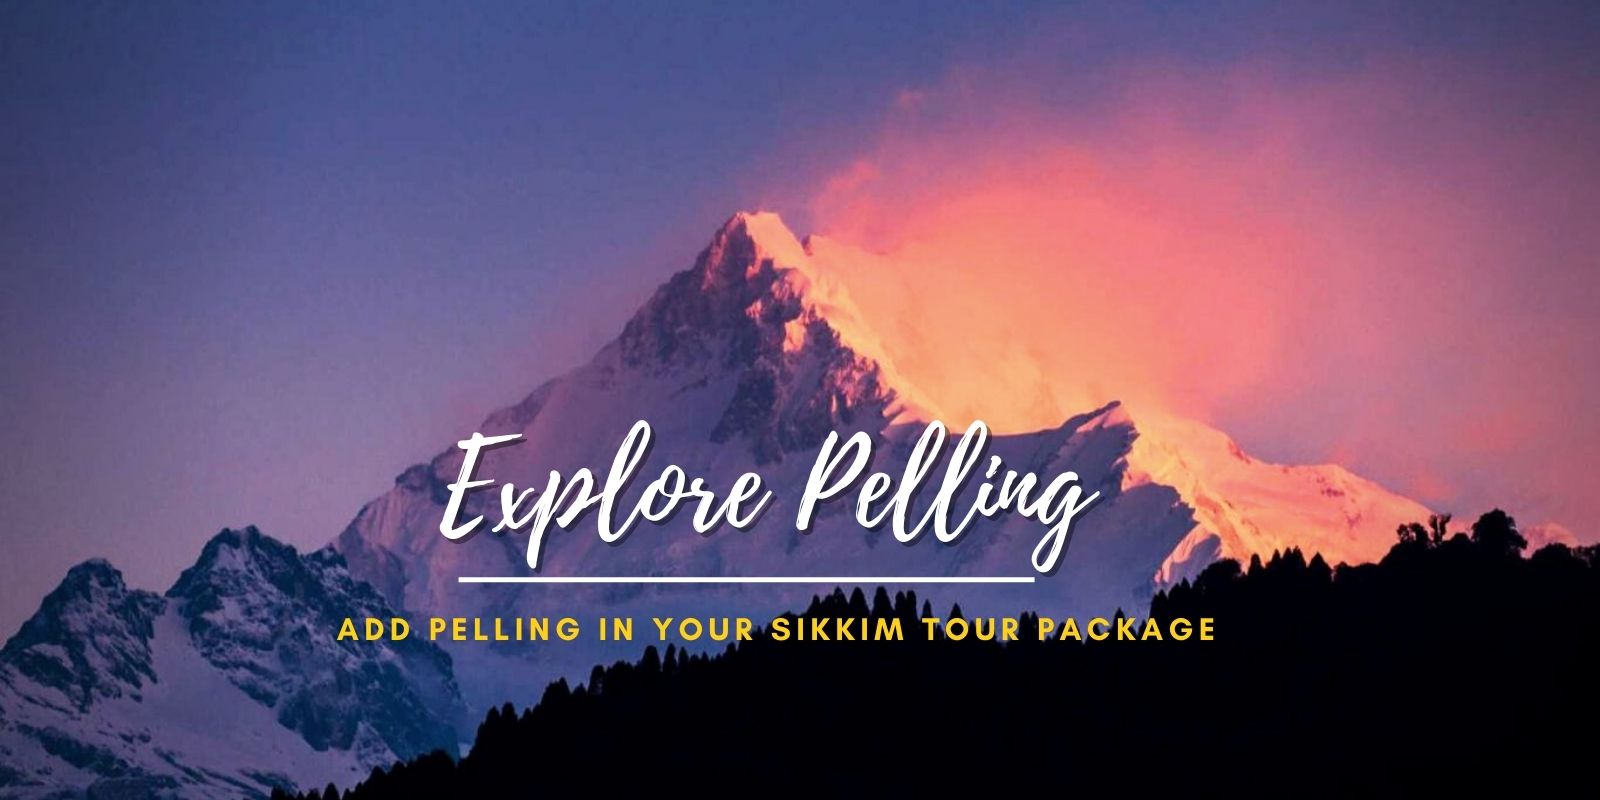 Top Reasons to Add Pelling in Your Sikkim Tour Package